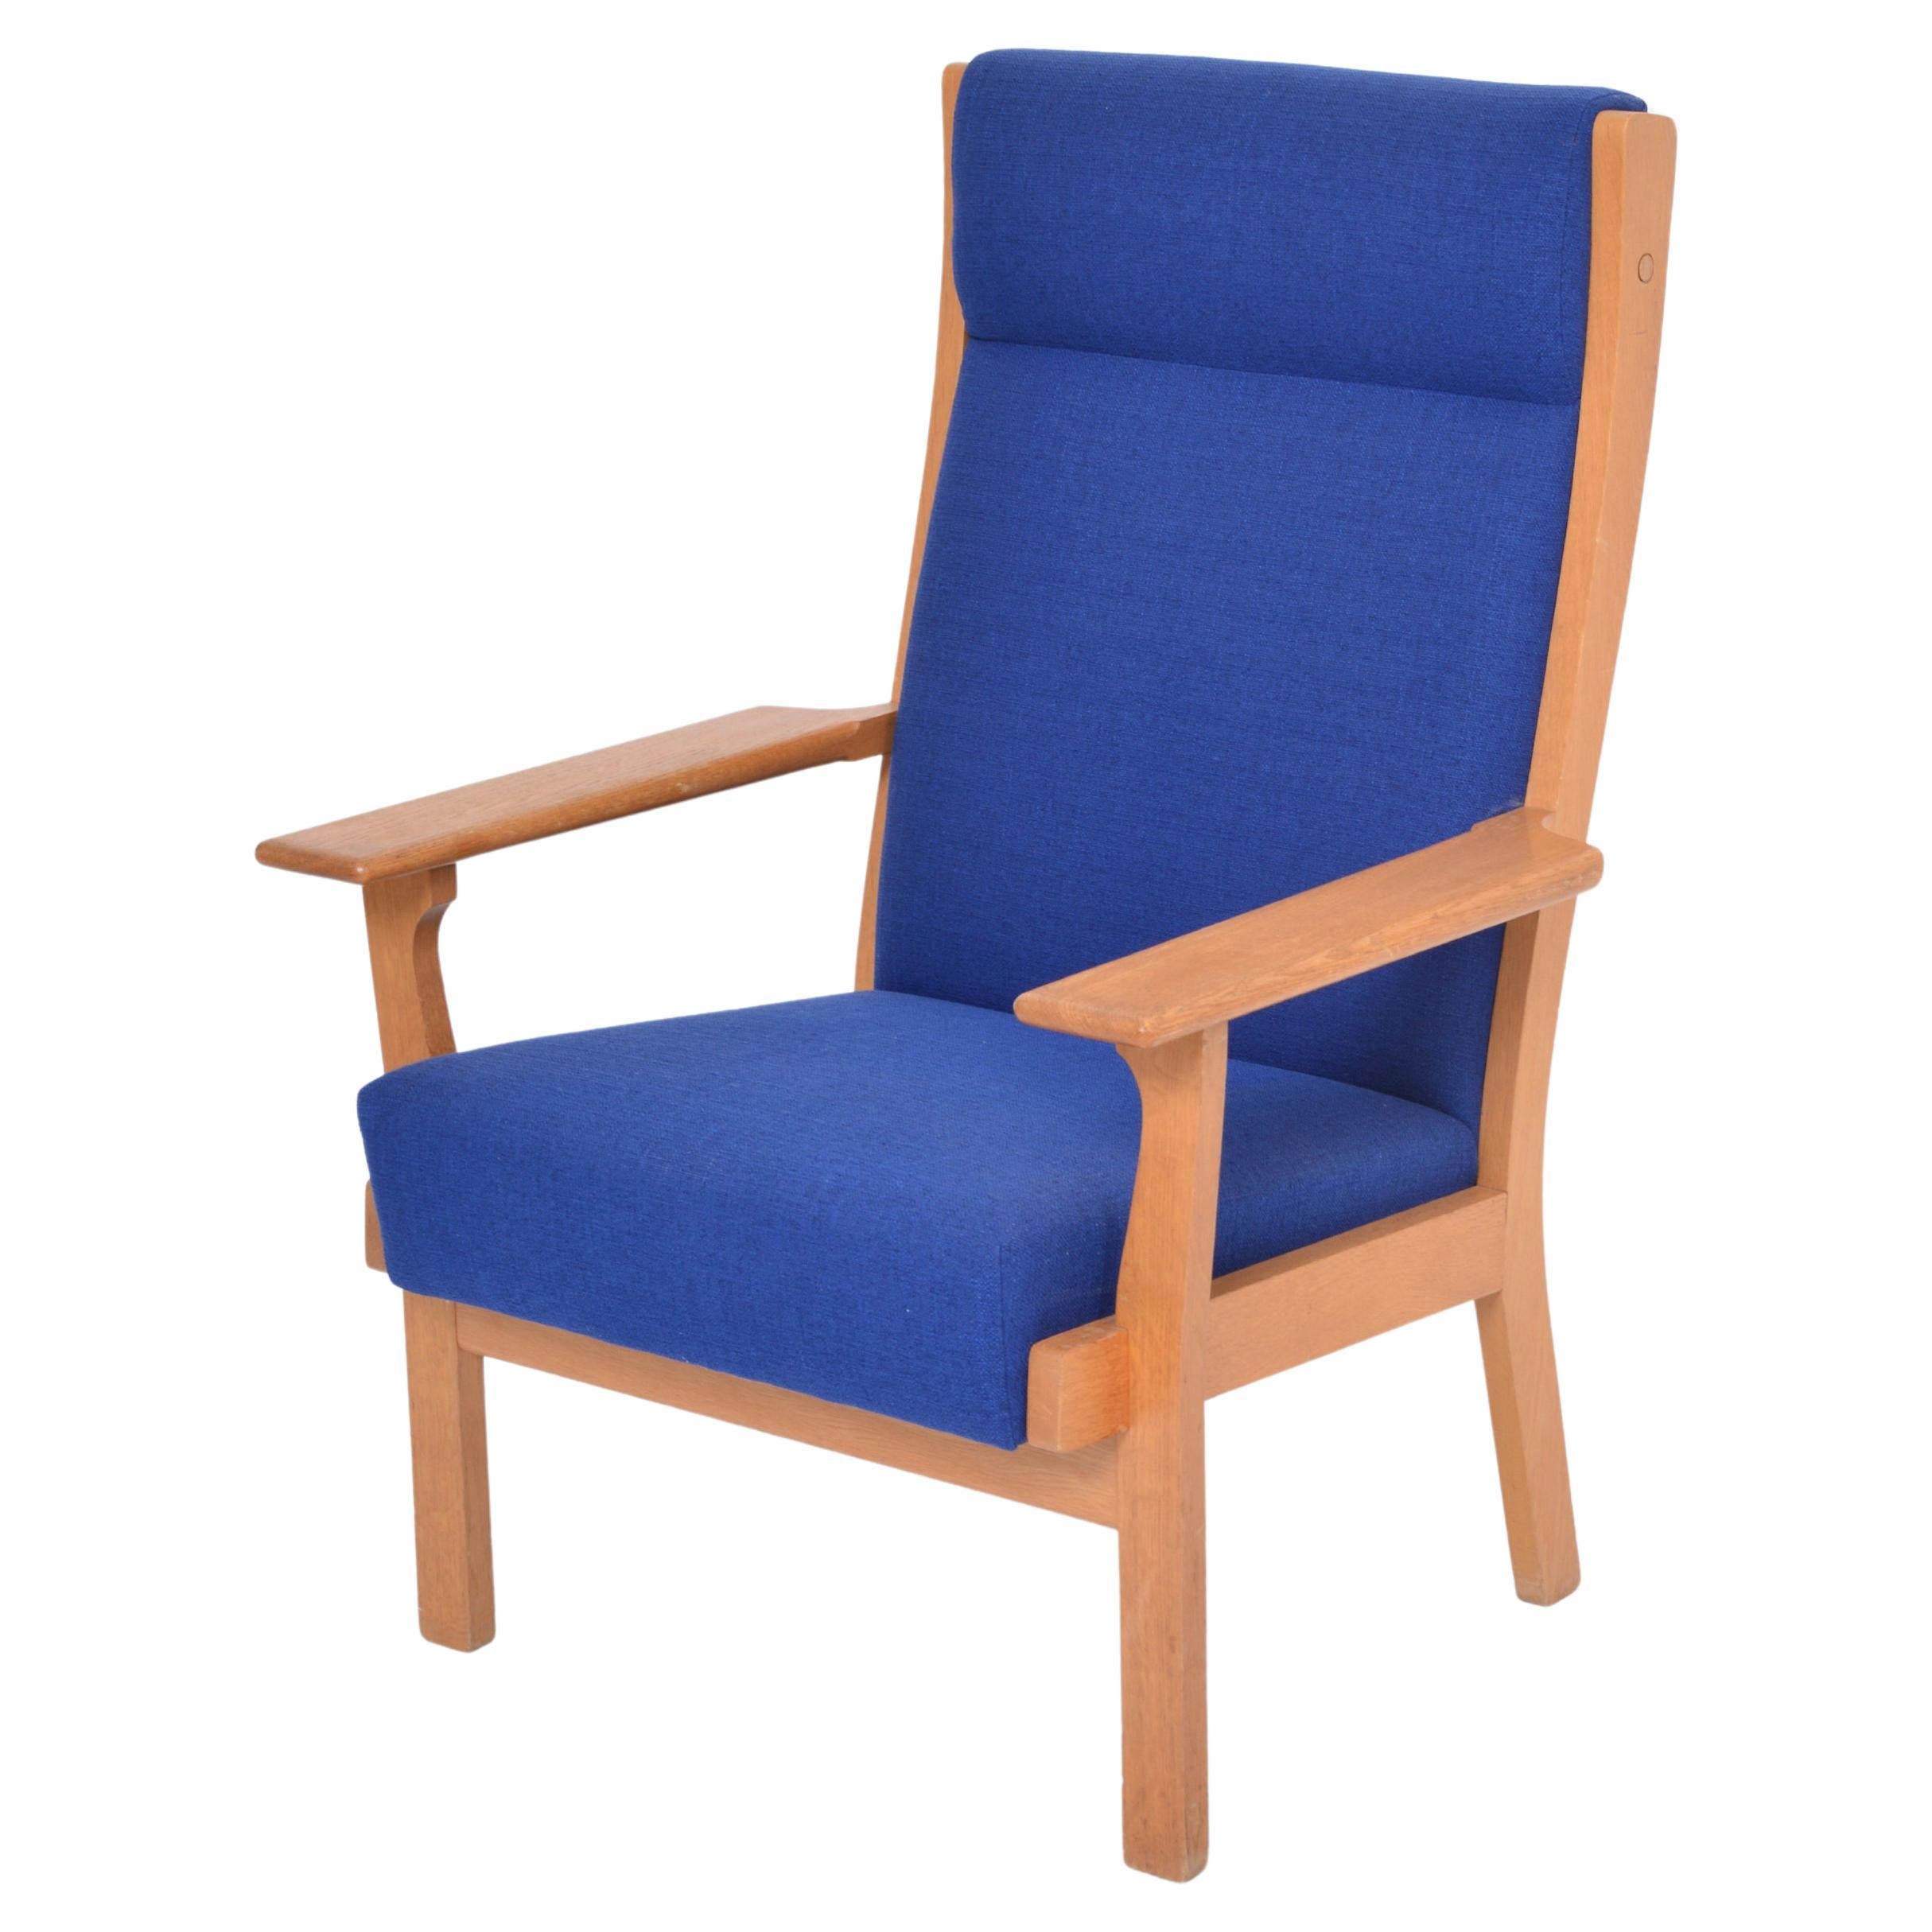 Reupholstered Danish Mid-Century Modern GE 181 a Chair by Hans Wegner for GETAMA For Sale